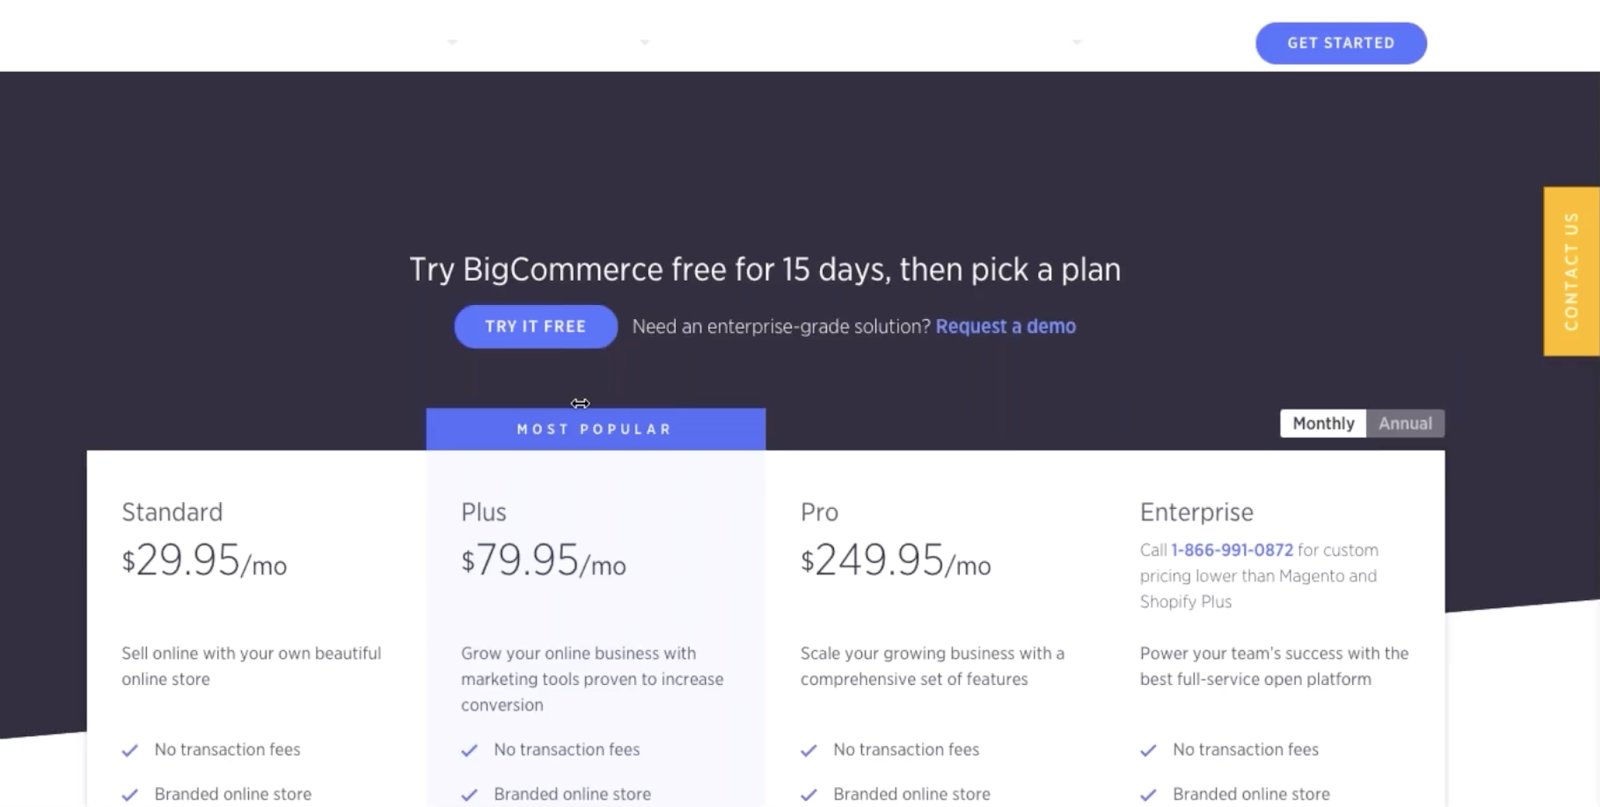 Desktop View of The BigCommerce Pricing Page